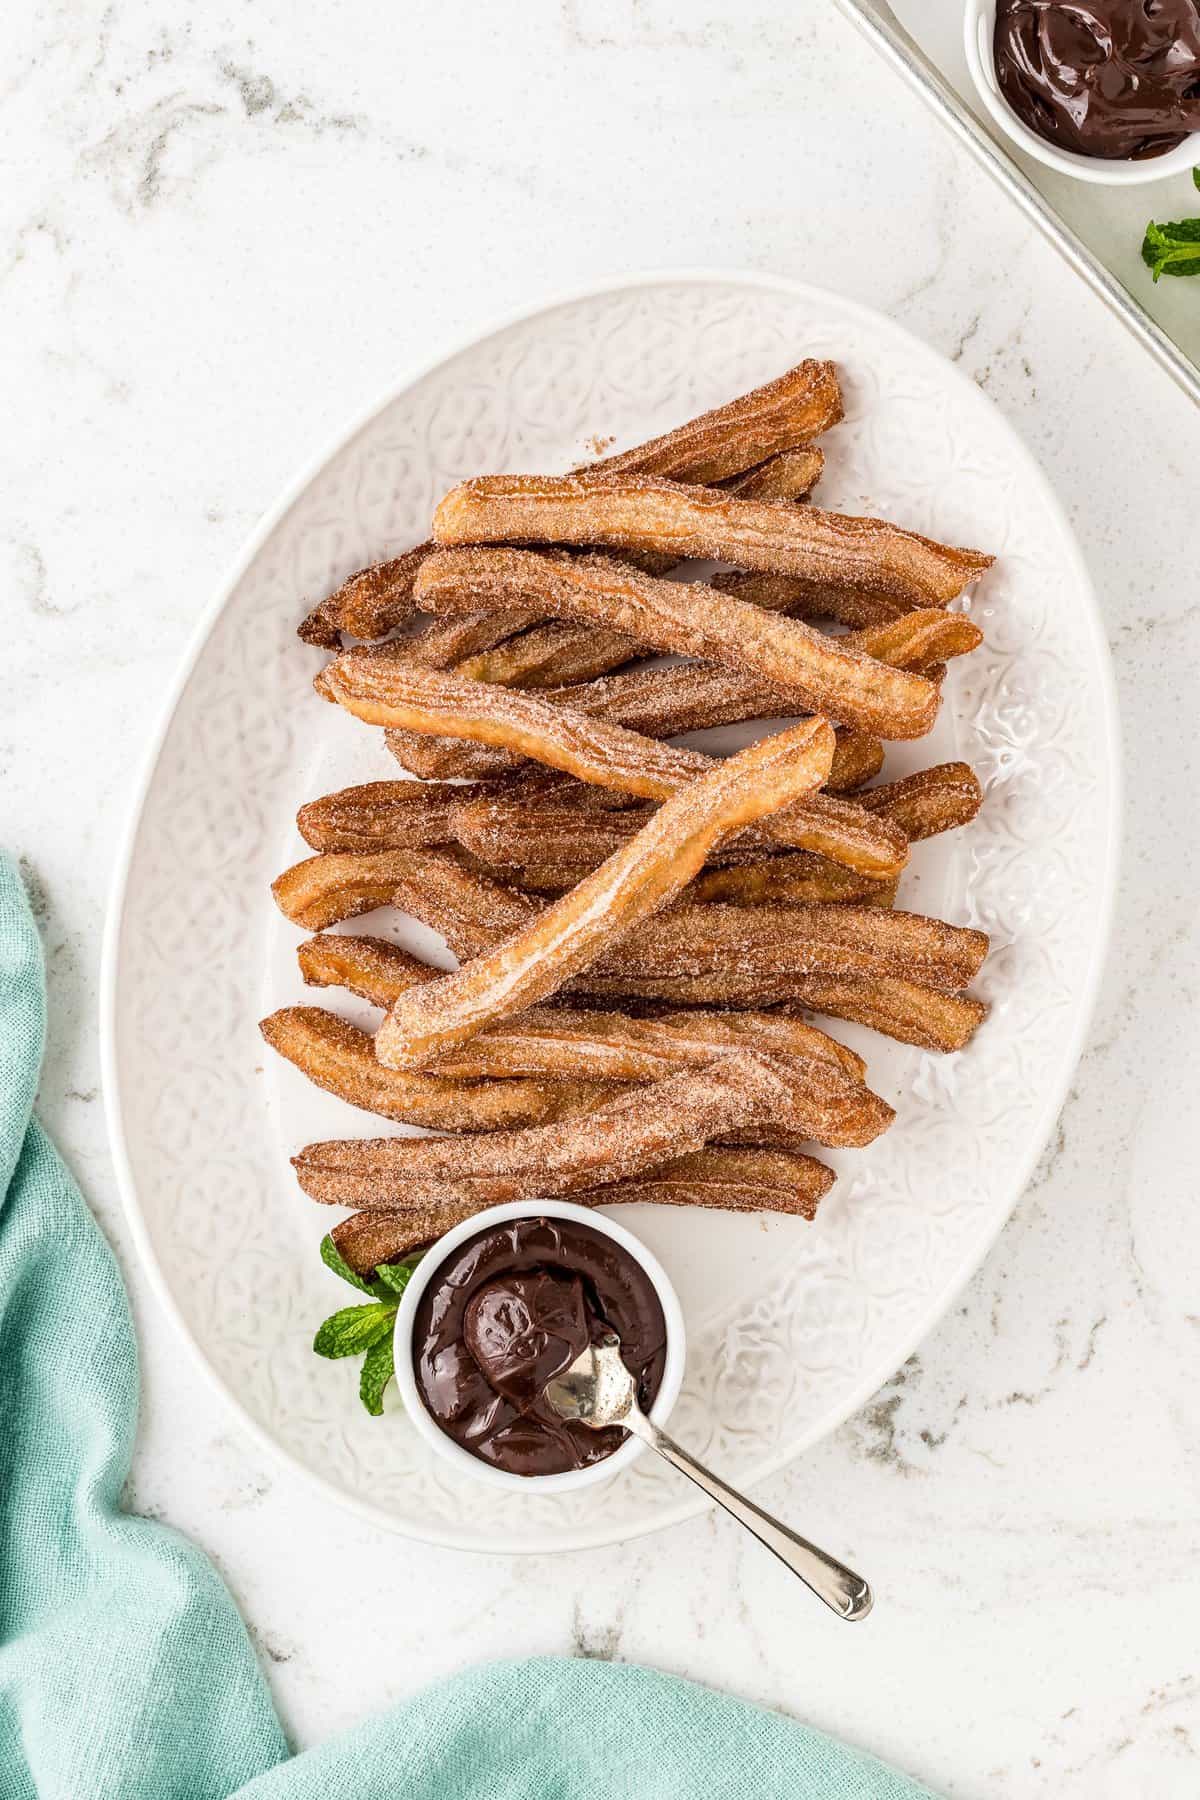 Overhead image of churros on baking dish with chocolate sauce